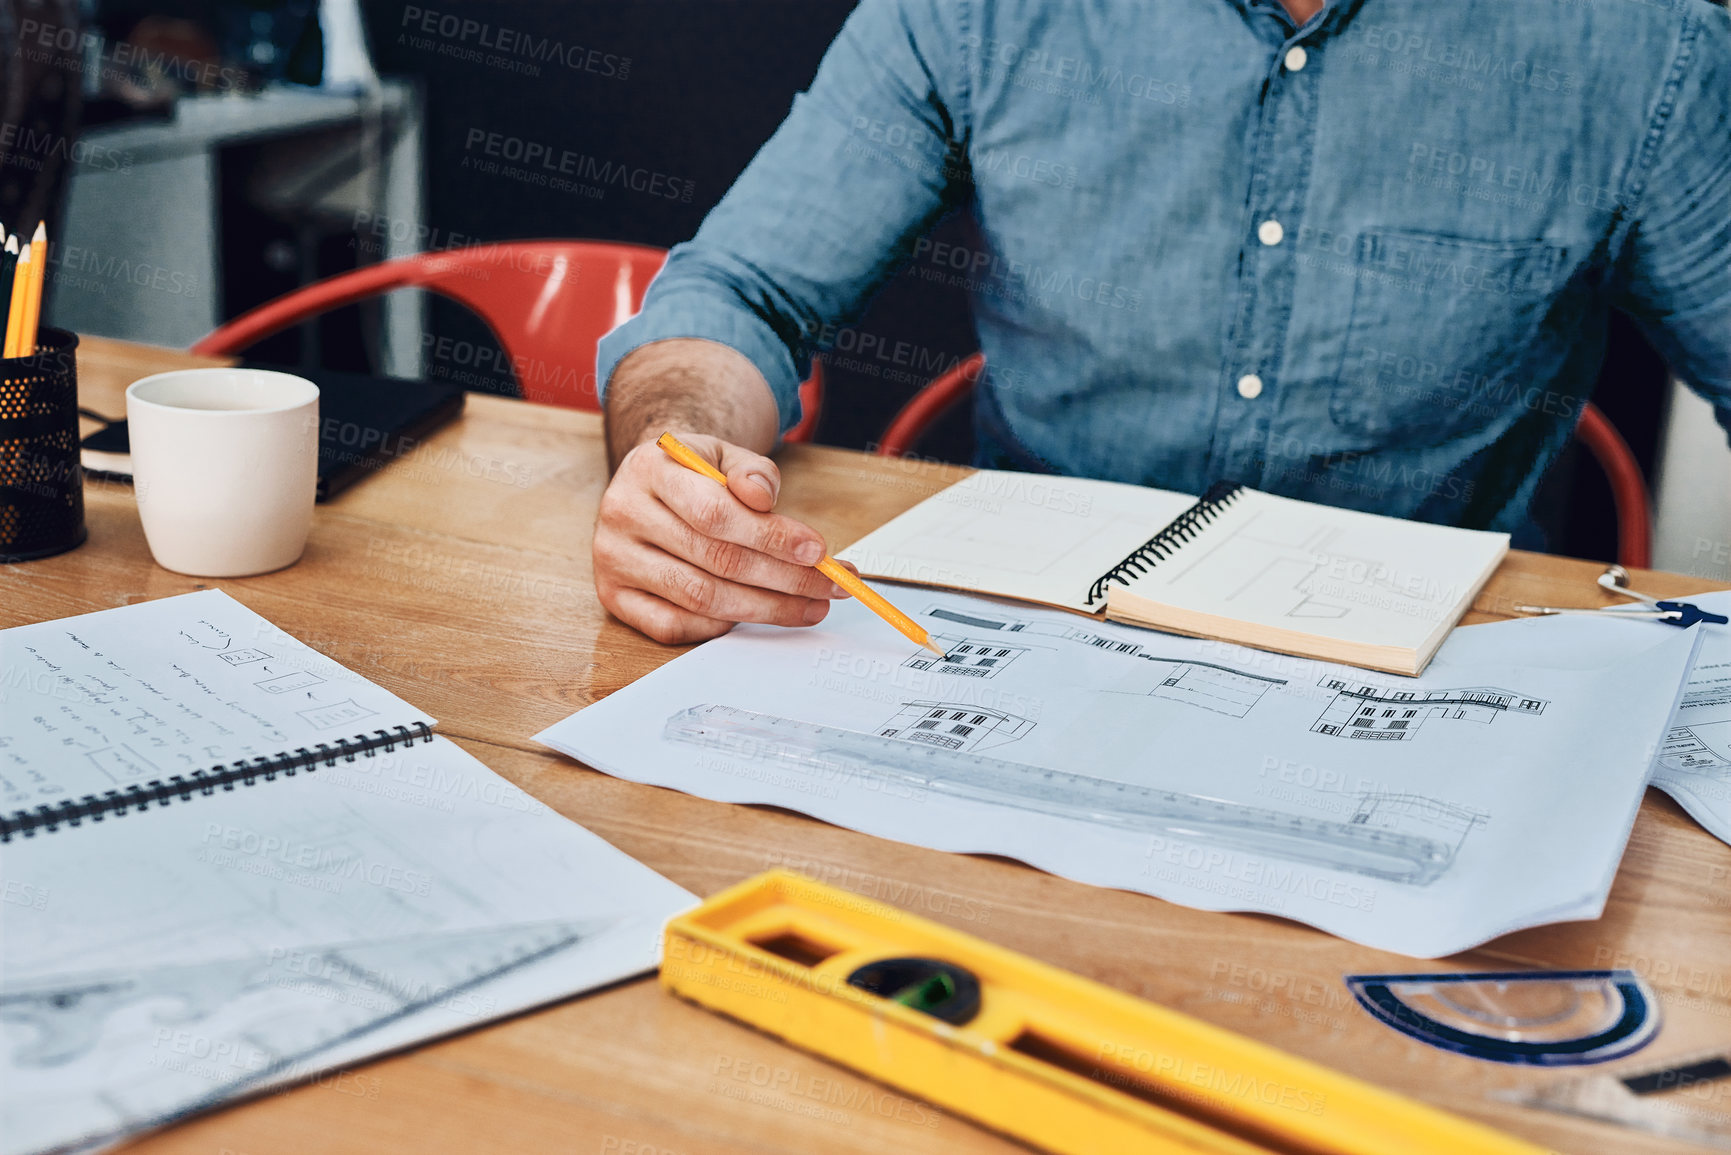 Buy stock photo Cropped shot of an unrecognizable male architect working with blueprints in a modern office